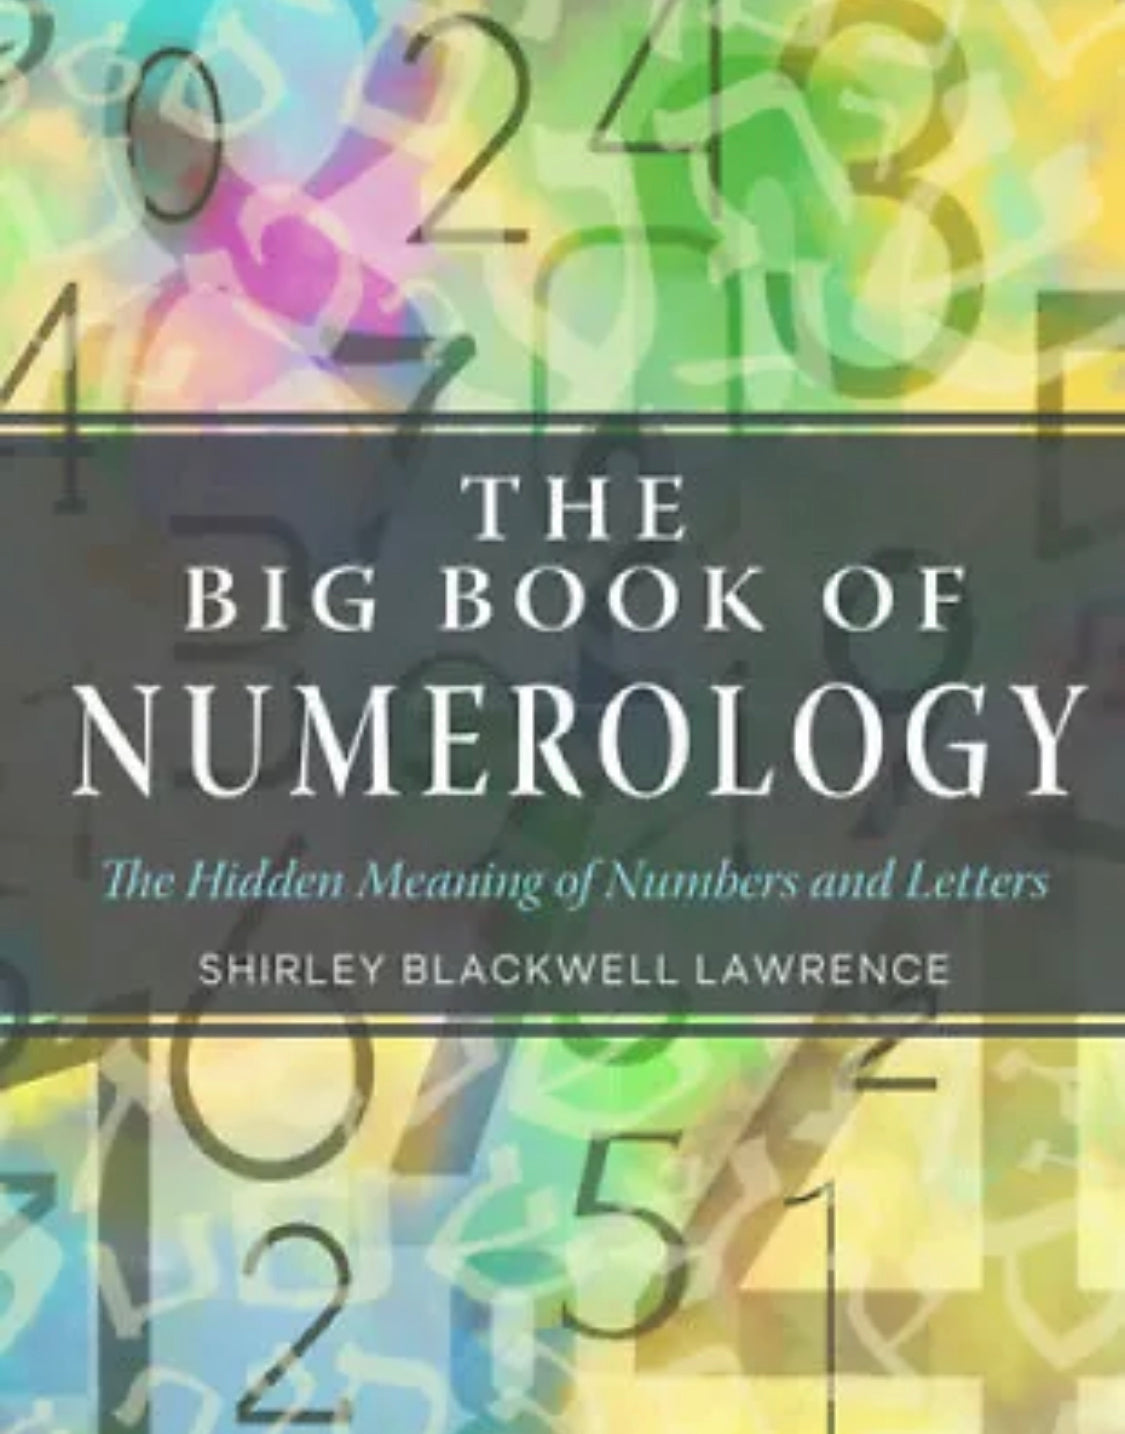 The Big Book of Numerology; Shirley Blackwell Lawrence